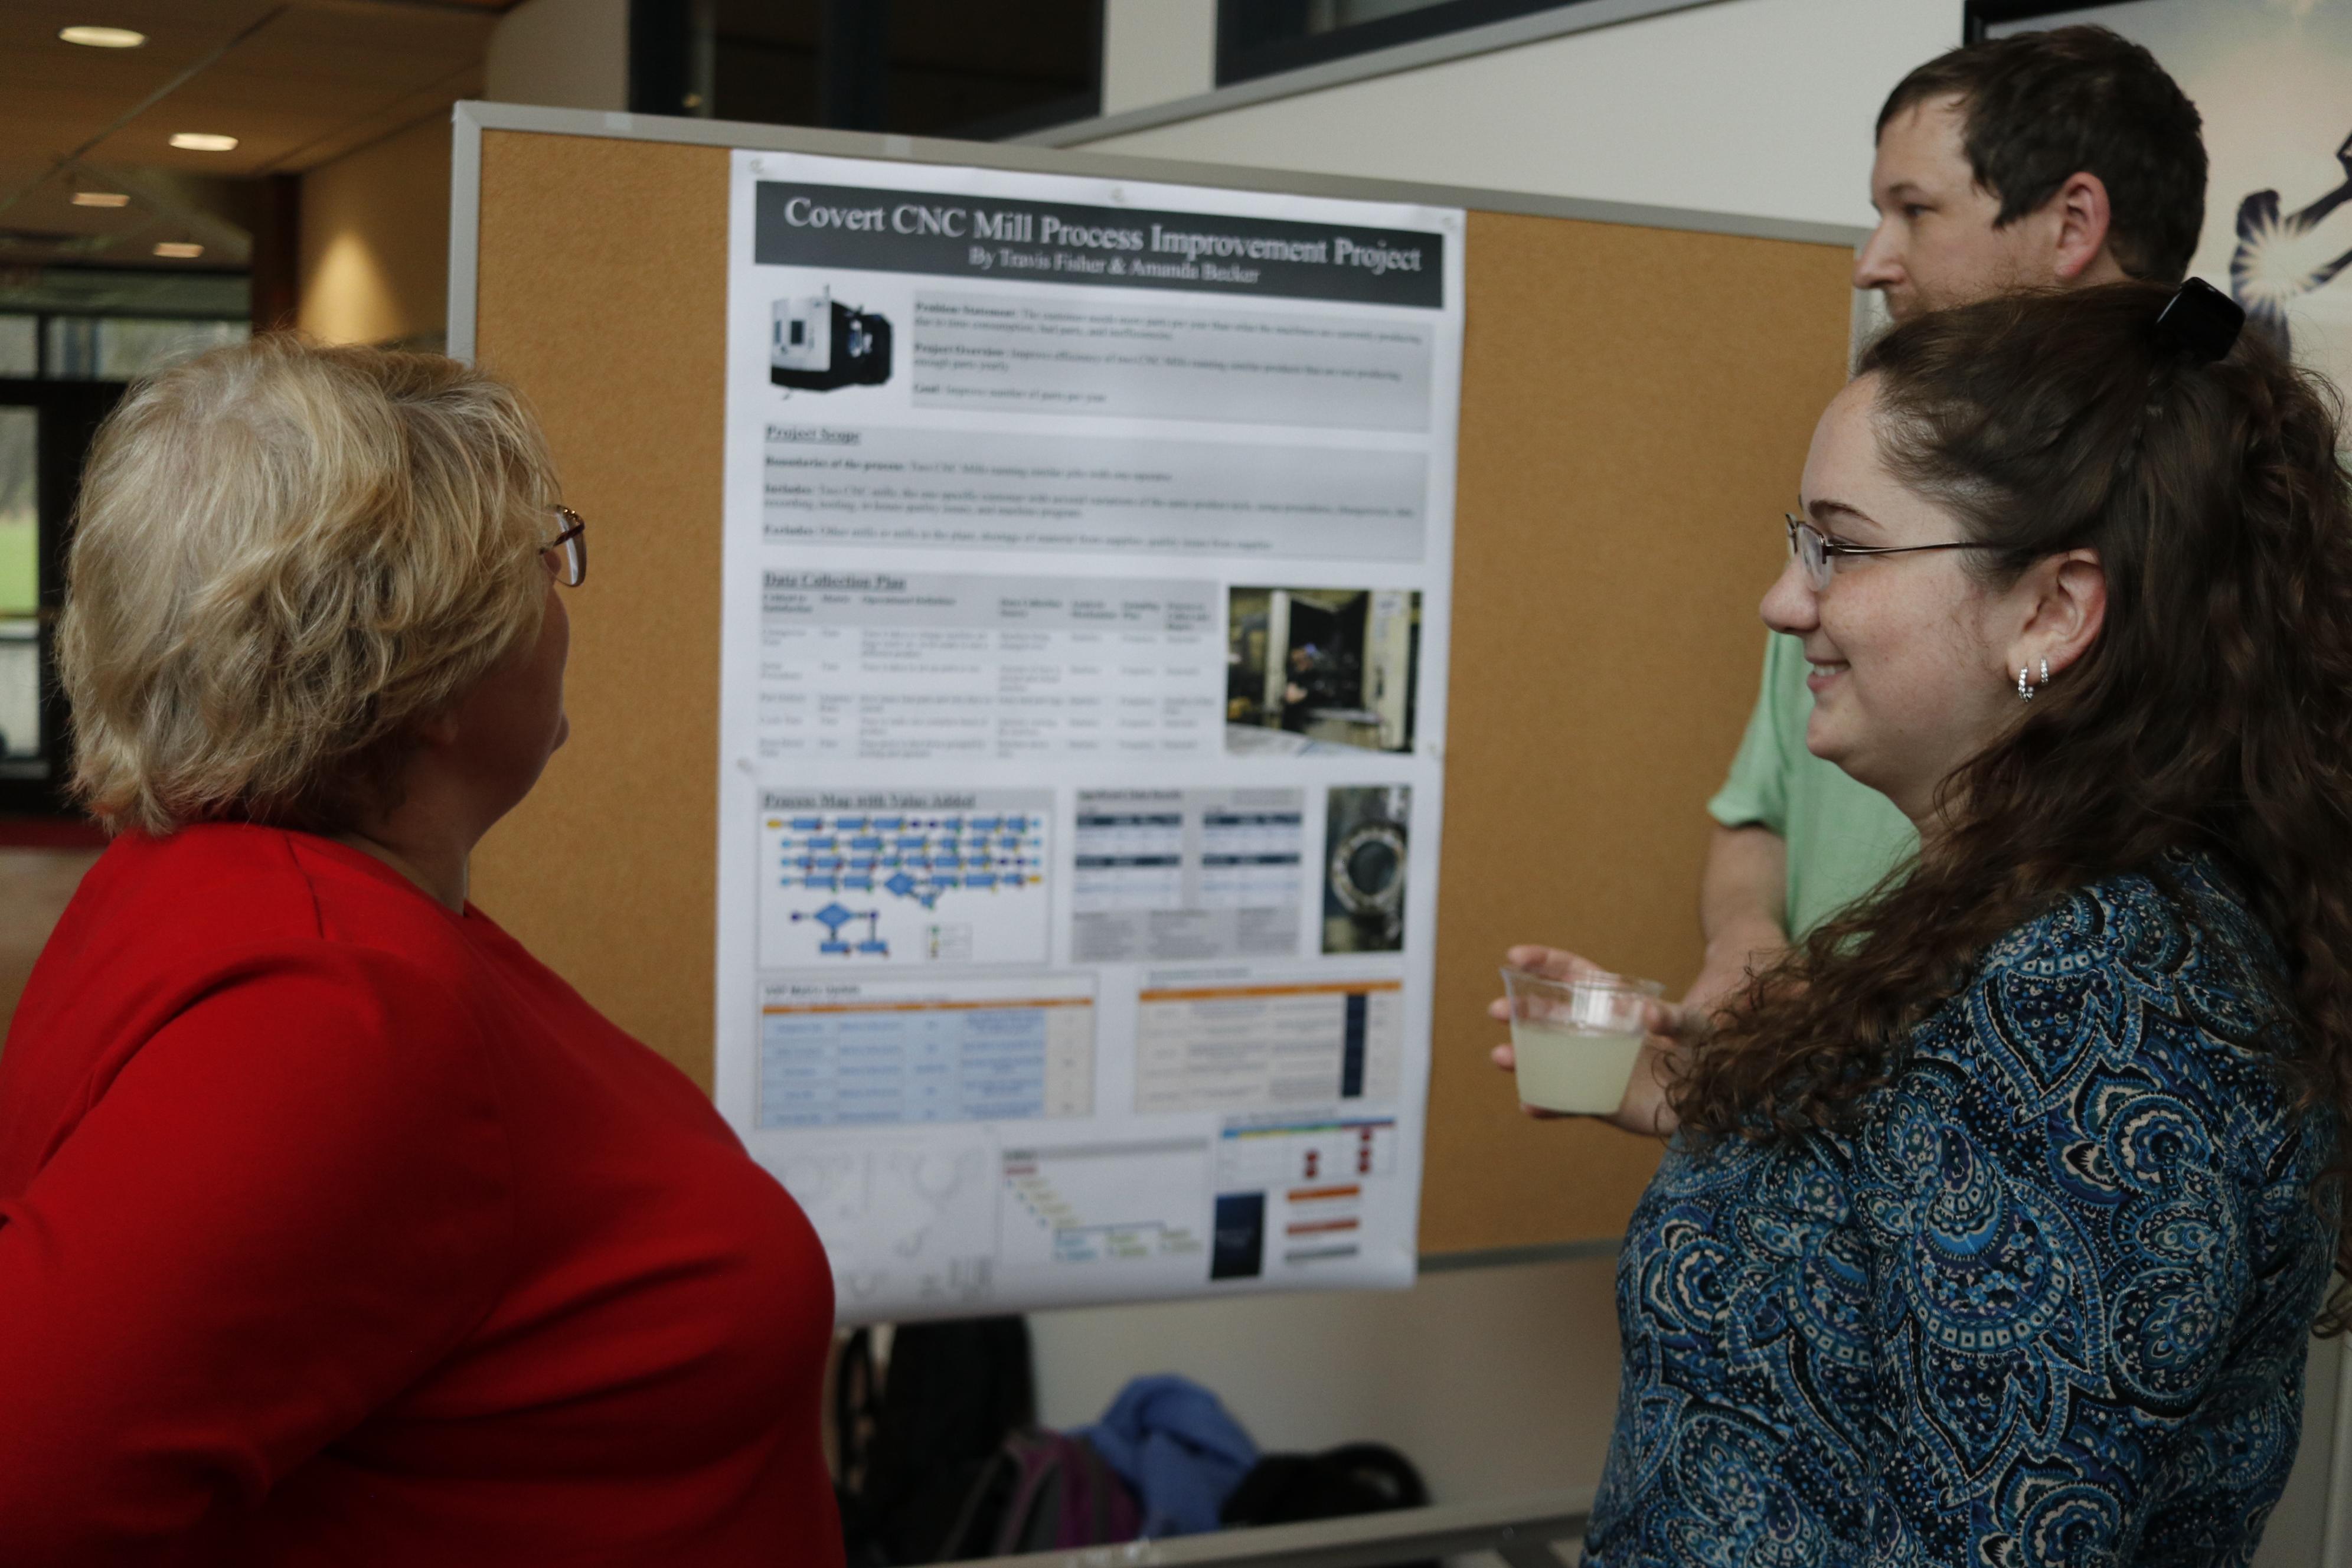 Three individuals standing in front of a research poster